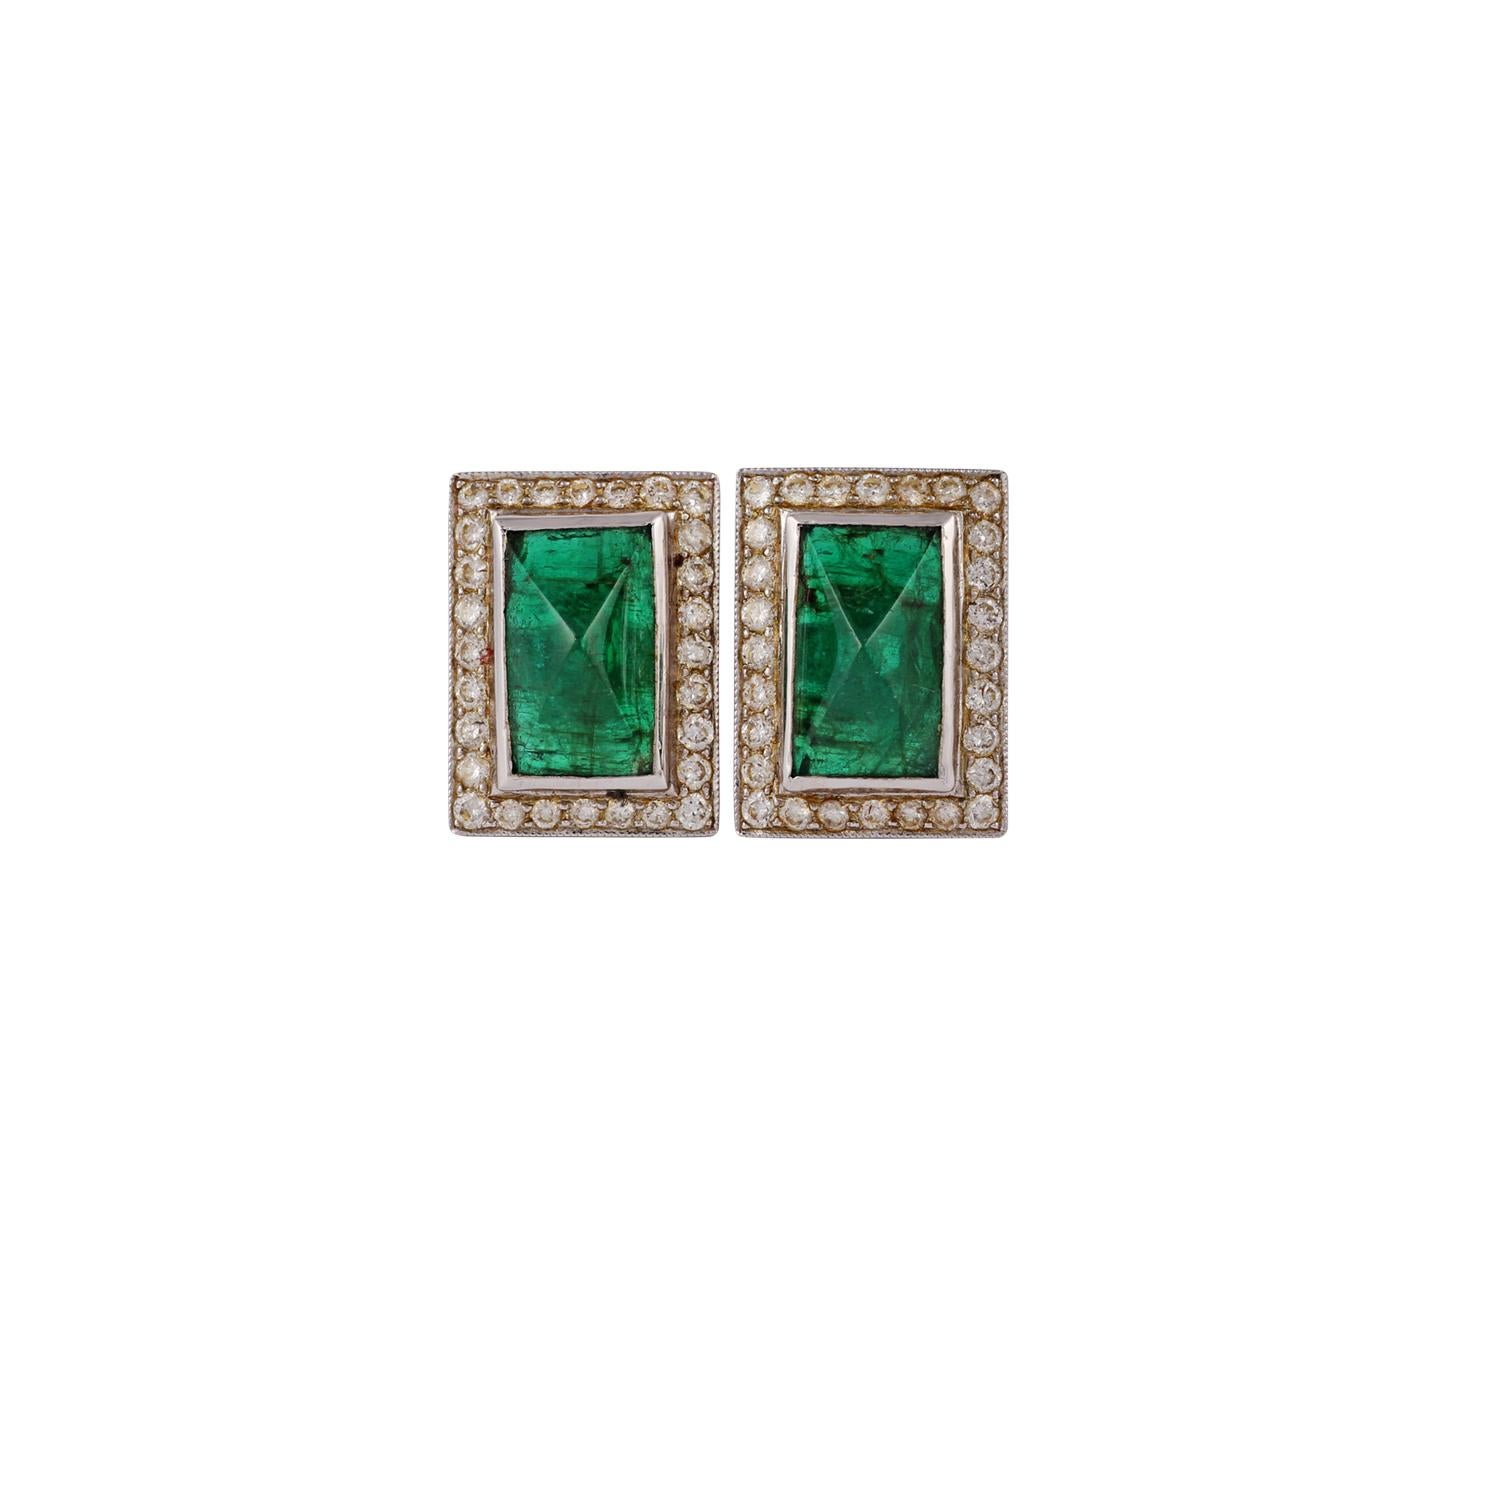 This is an elegant Stud earring pair with emerald & diamonds feature 2 pieces  emeralds weight 2.76carats, Diamonds weight 1.01 carat , these earrings entirely made in 18K white gold weight 6.24 grams.